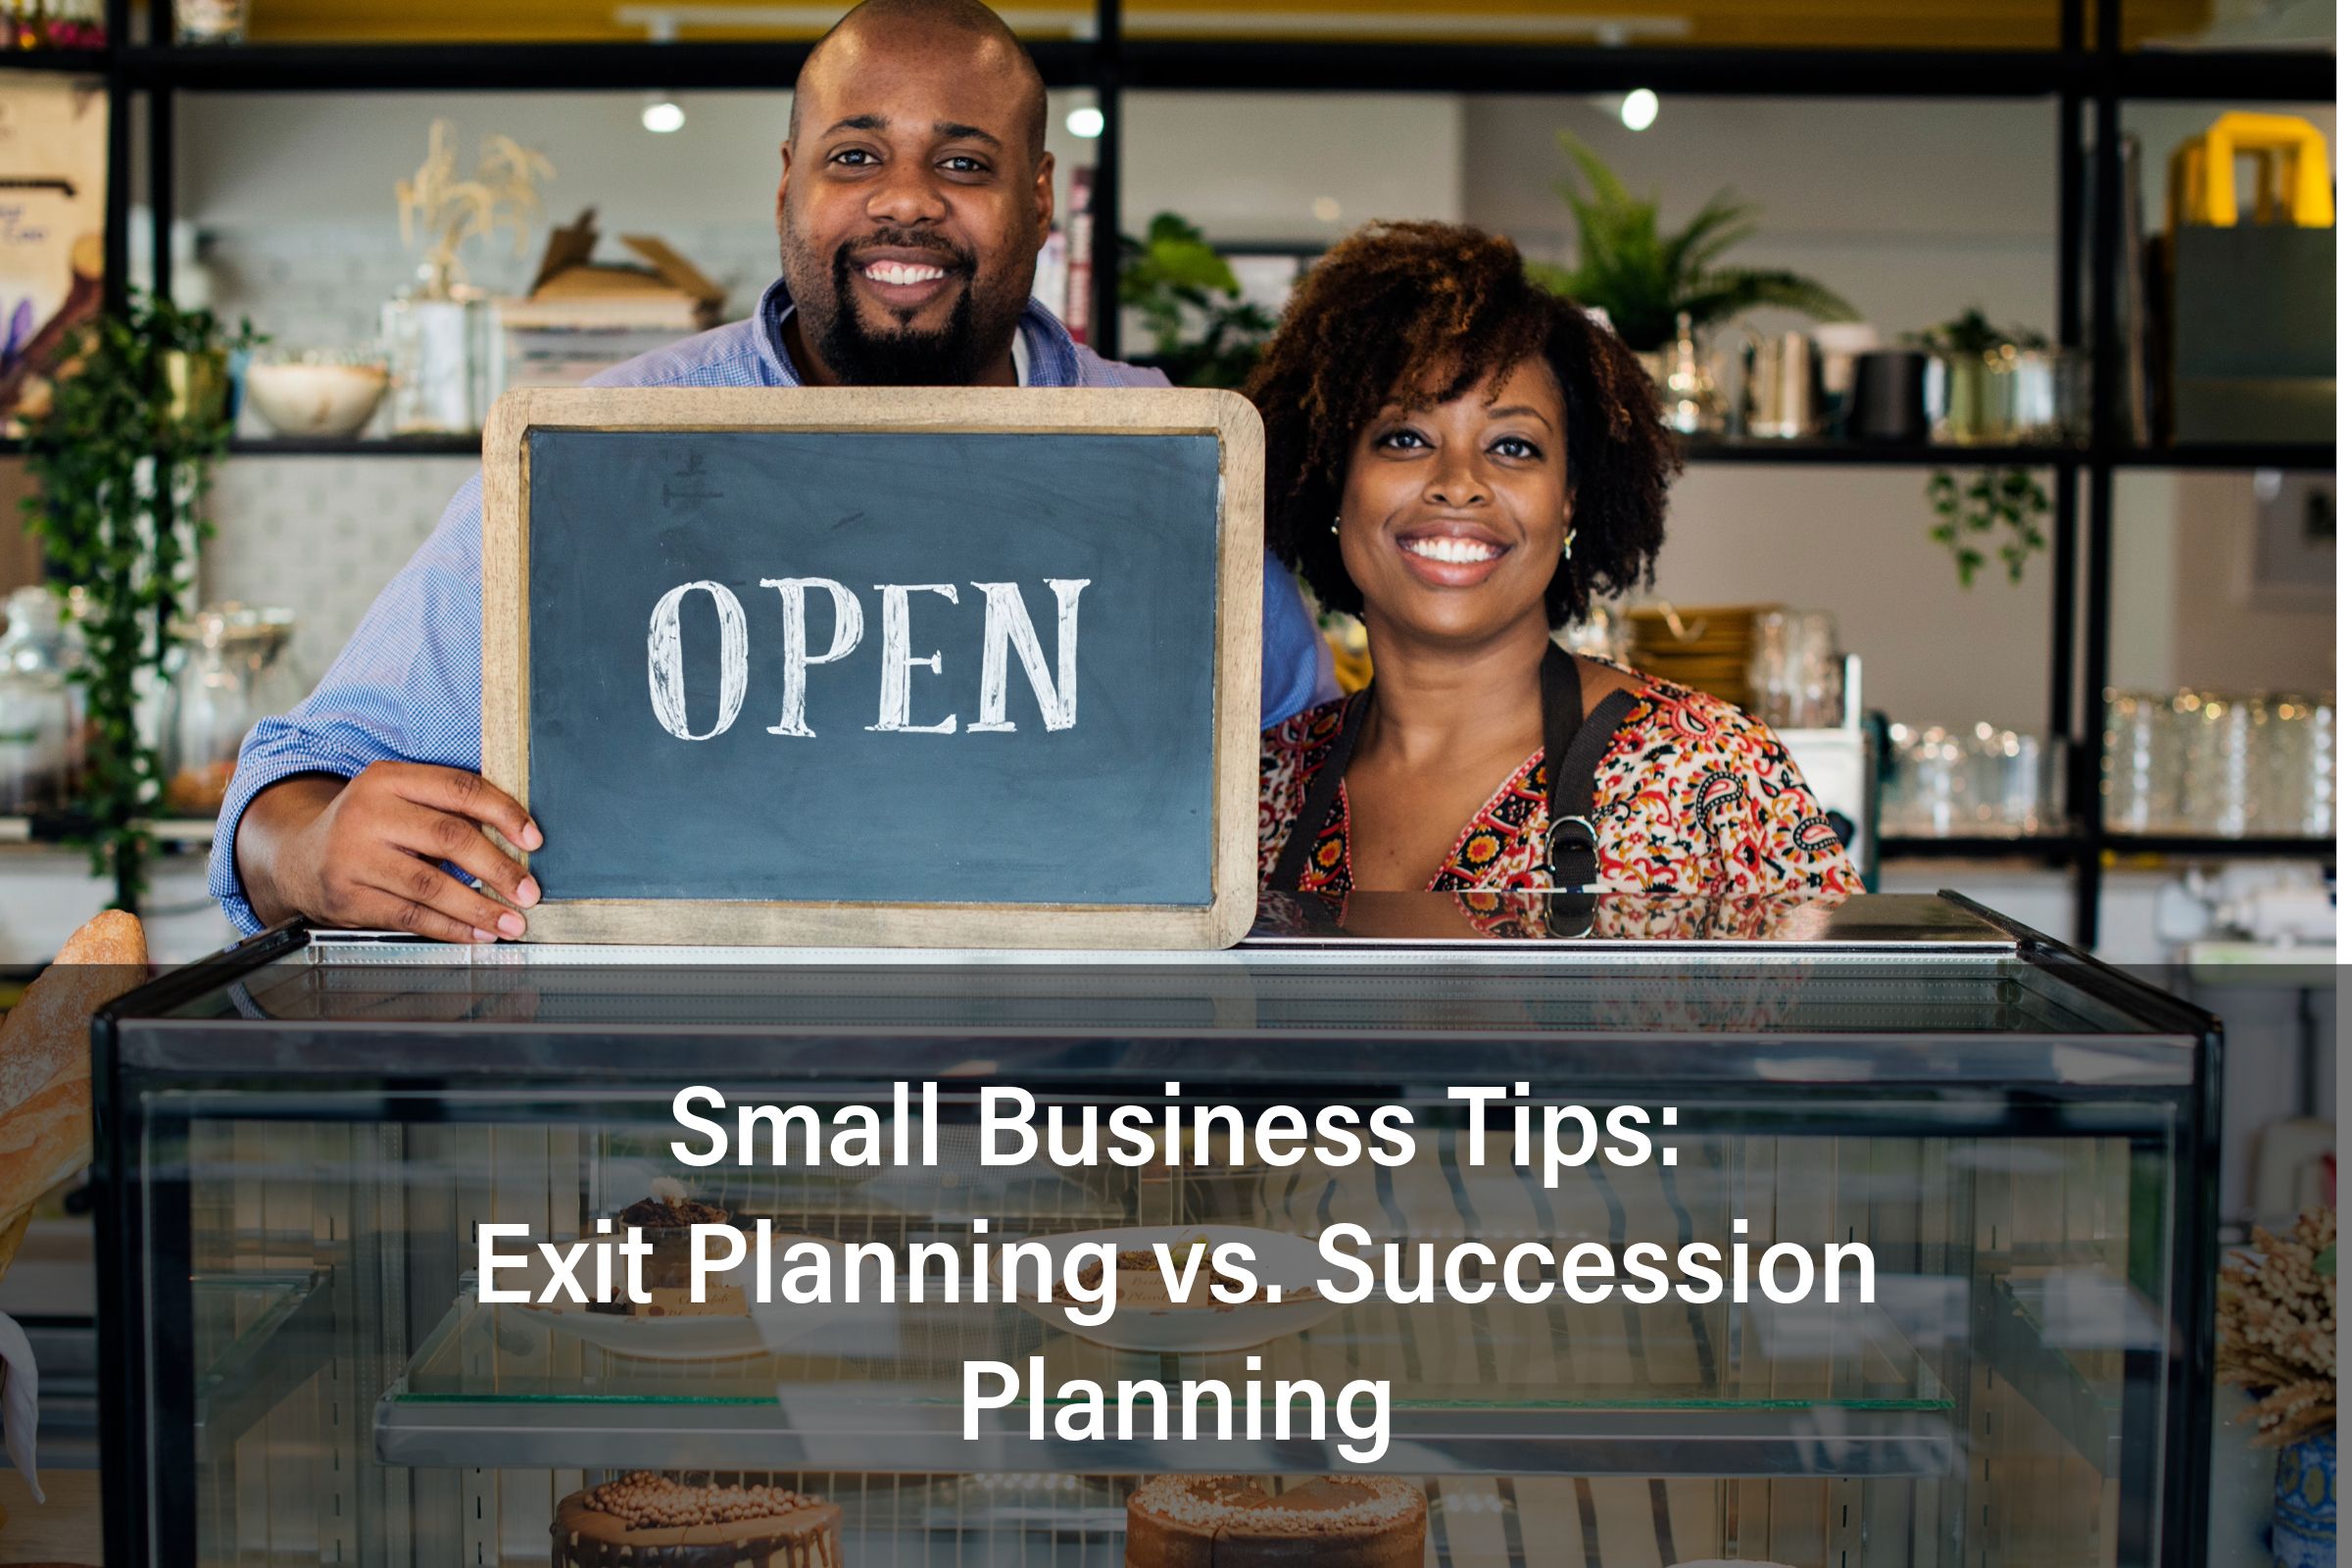 Exit planning and succession planning may seem like similar processes, but the intentions and steps of both are different.